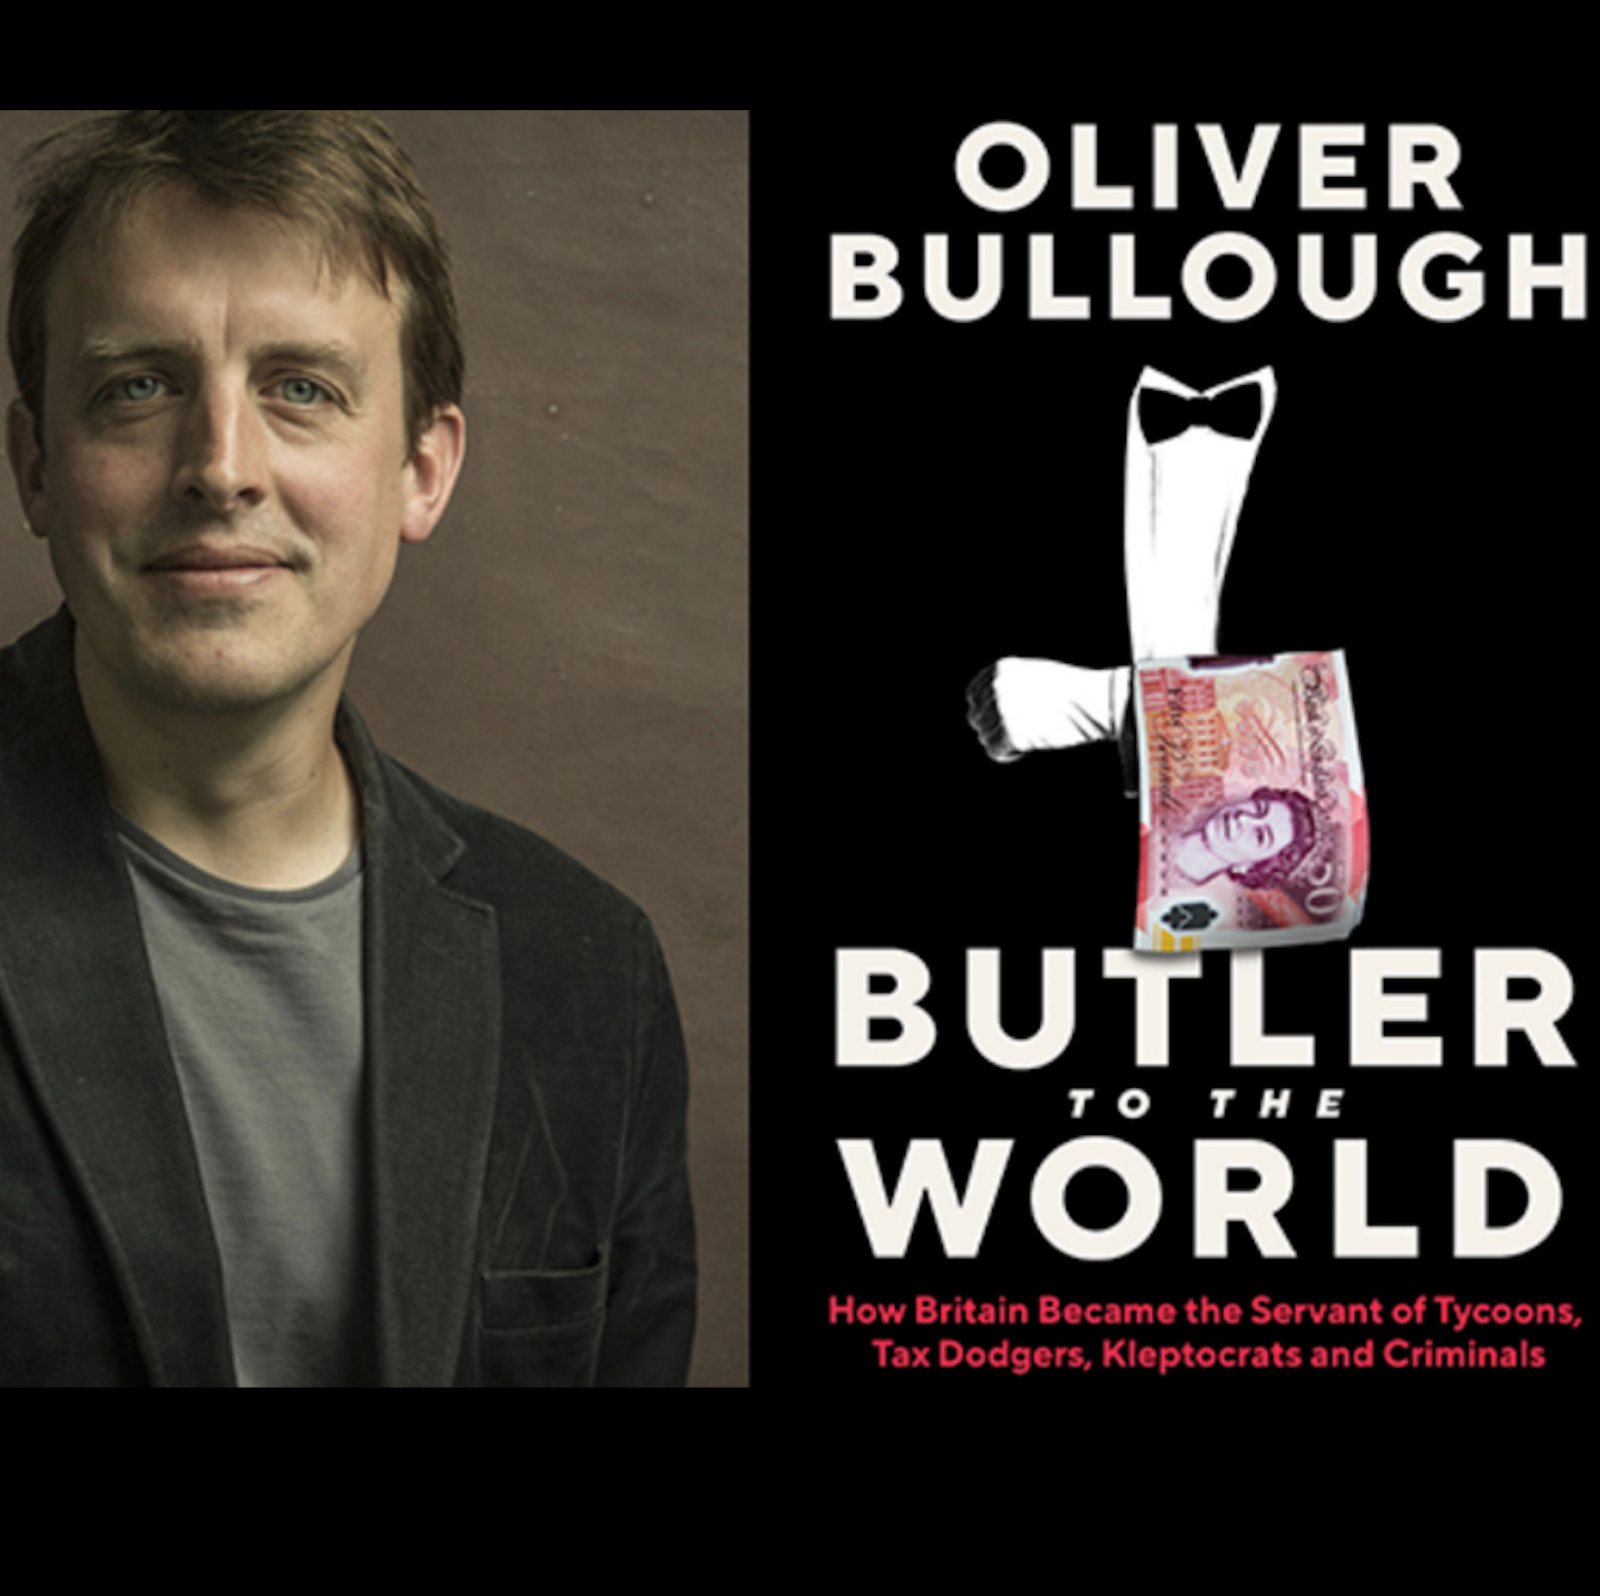 160: Can we drain Putin's swamp in Londongrad? With Oliver Bullough